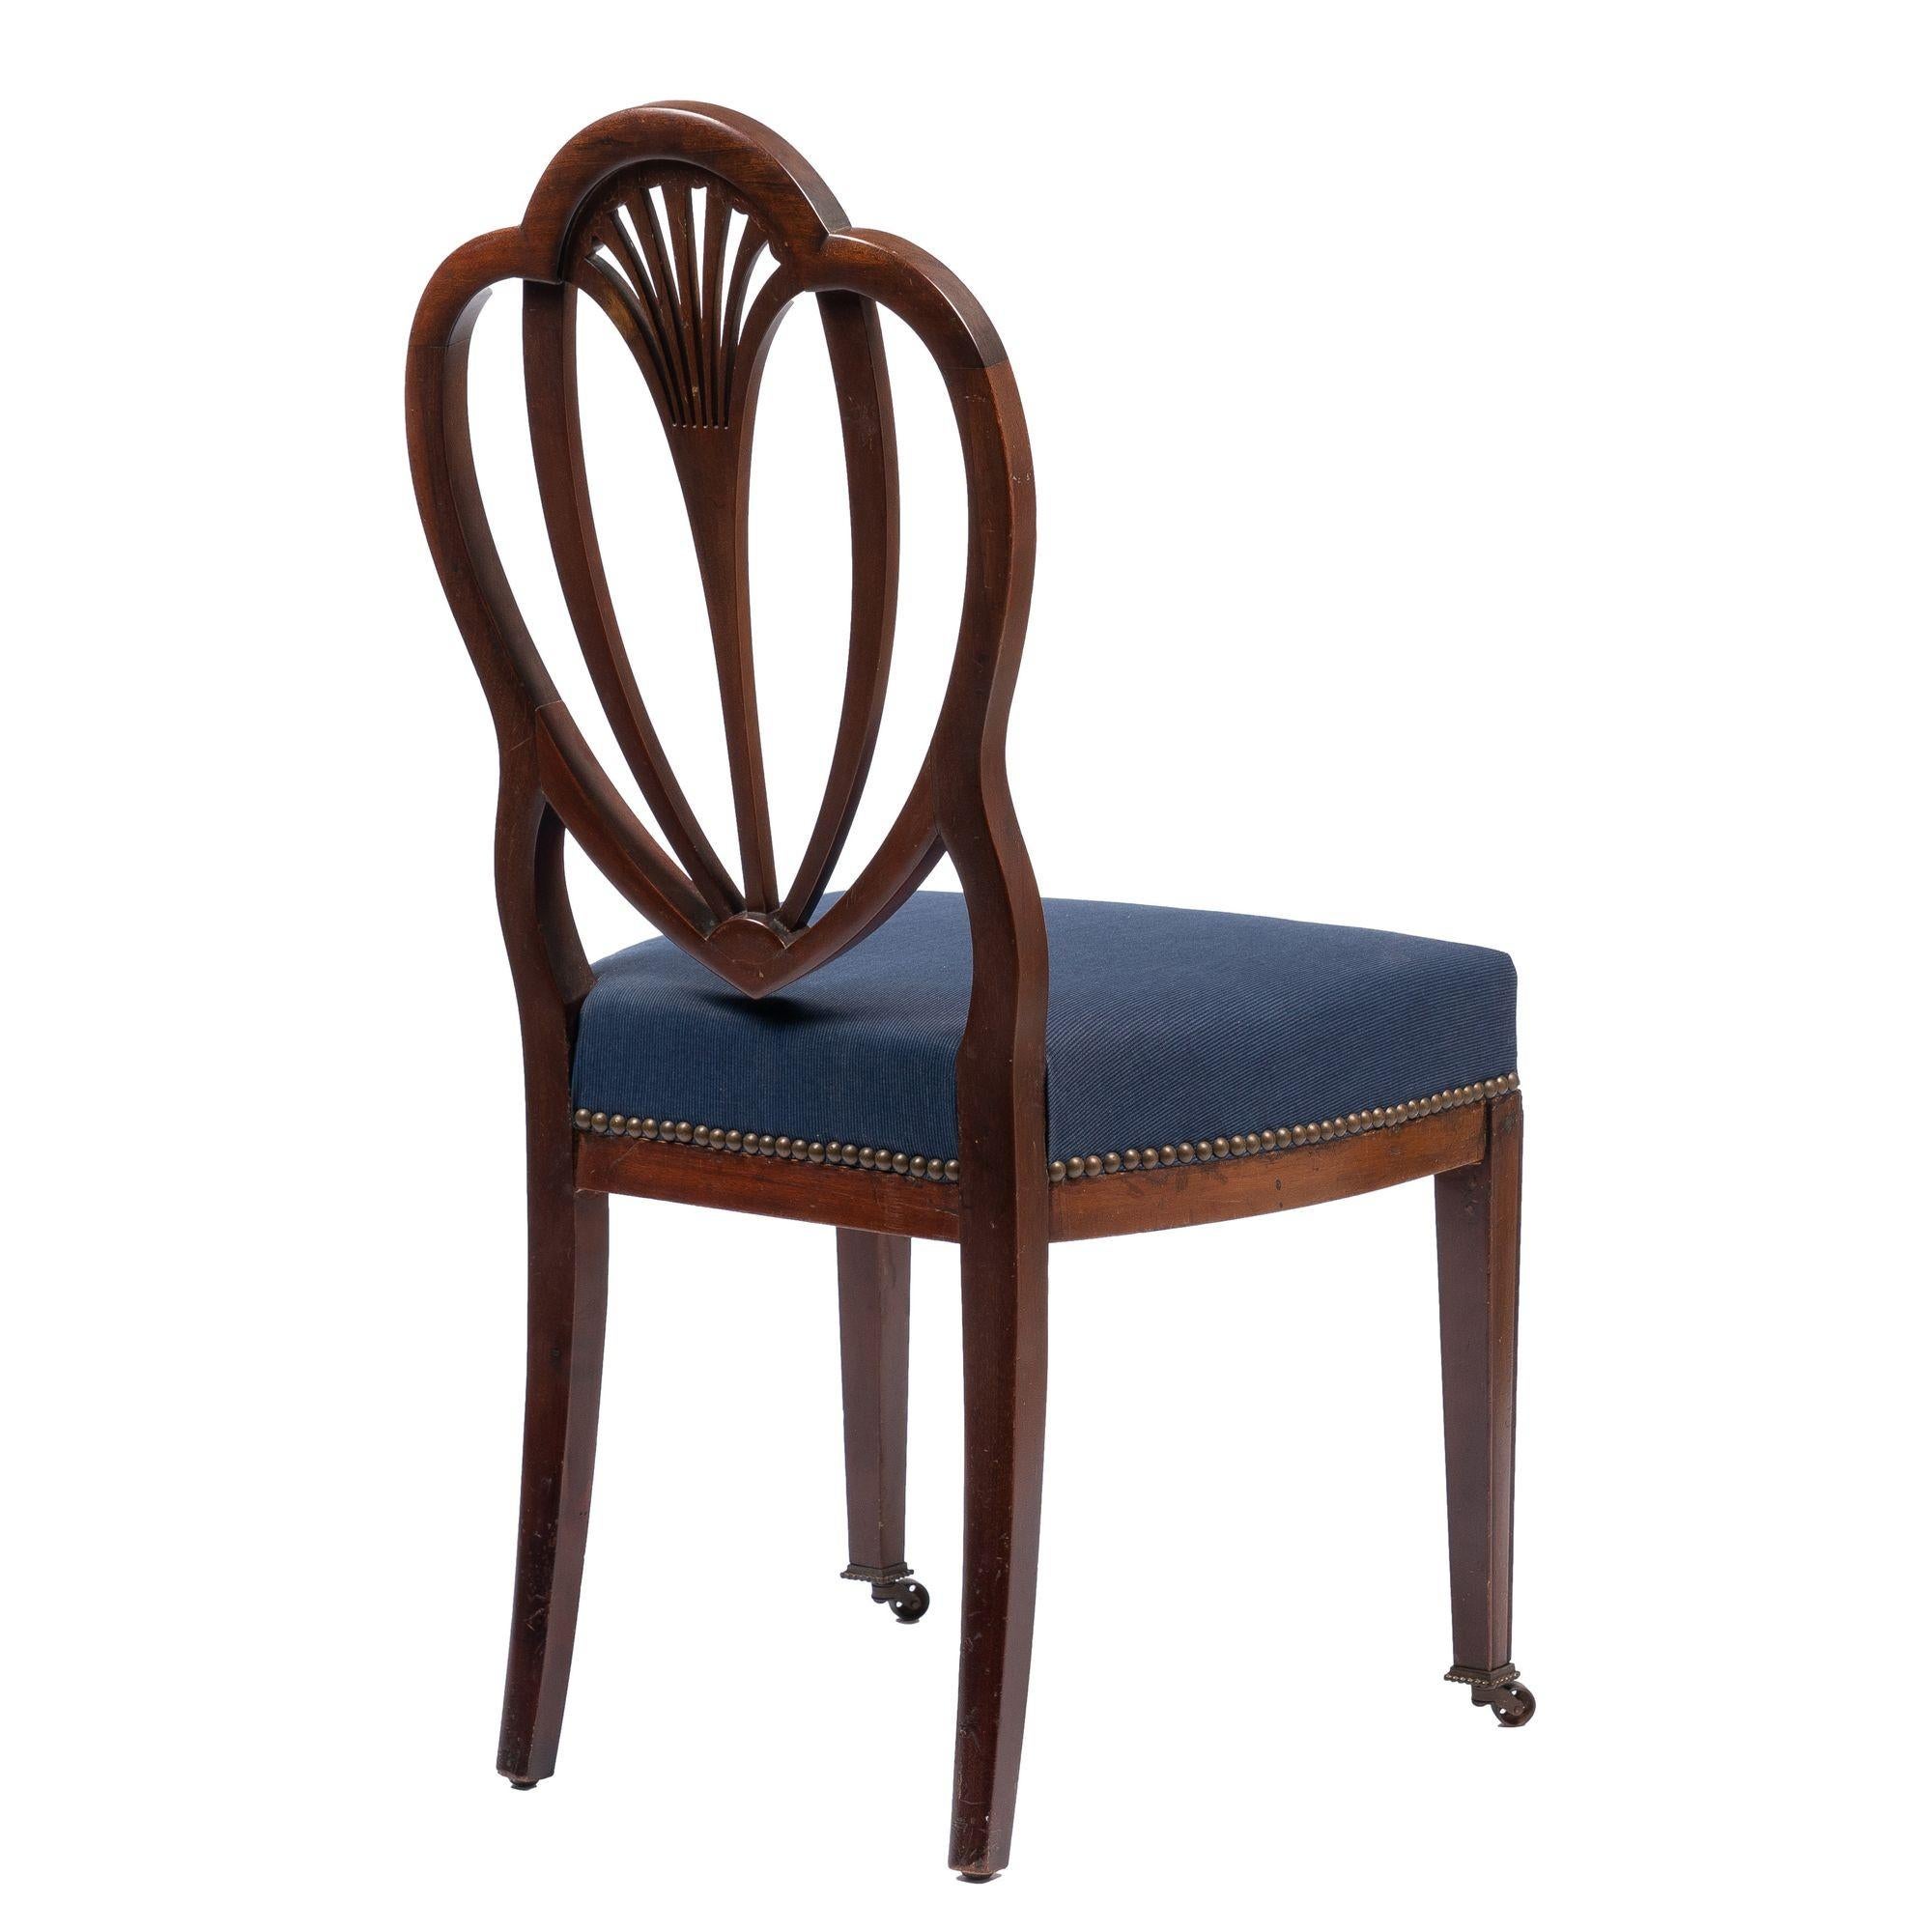 Pair of Academic Revival Federal Mahogany Heart Back Side Chairs, 1900-25 For Sale 1